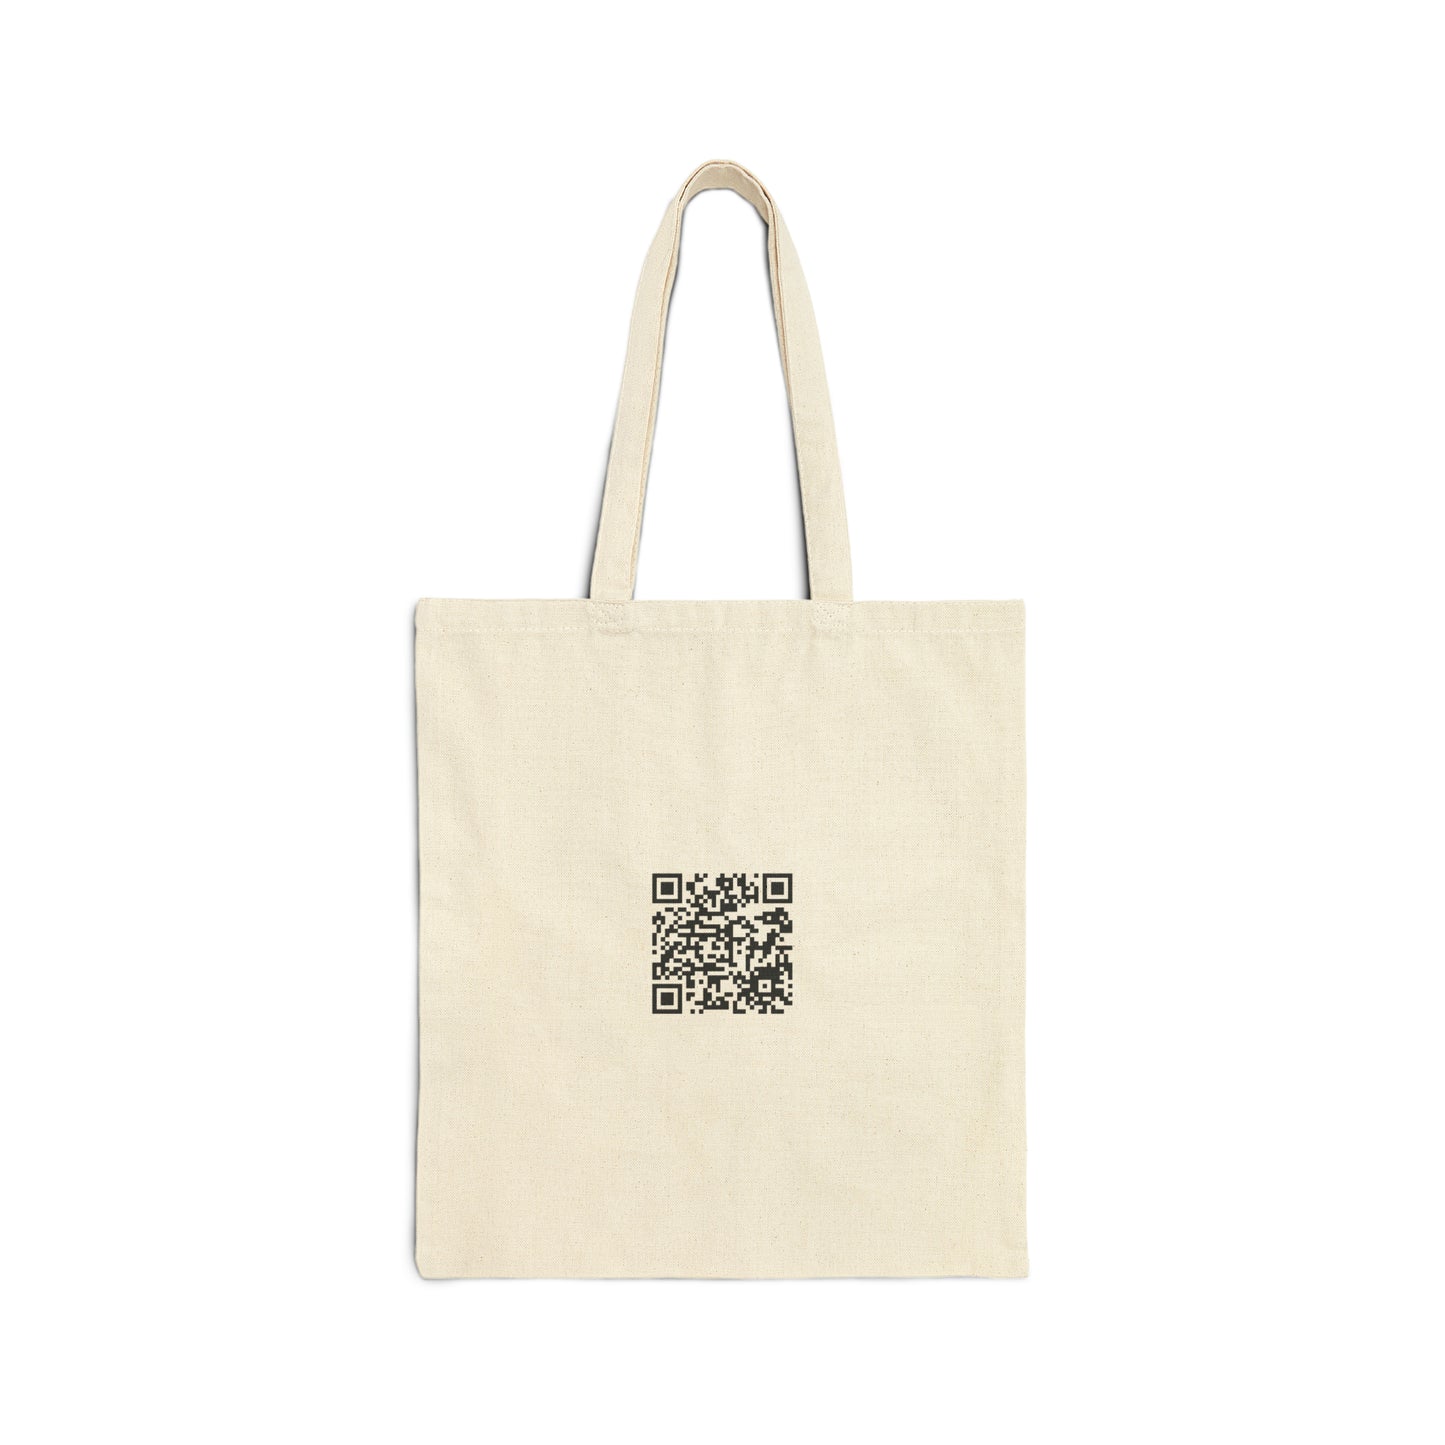 A Warrior For Her - Cotton Canvas Tote Bag